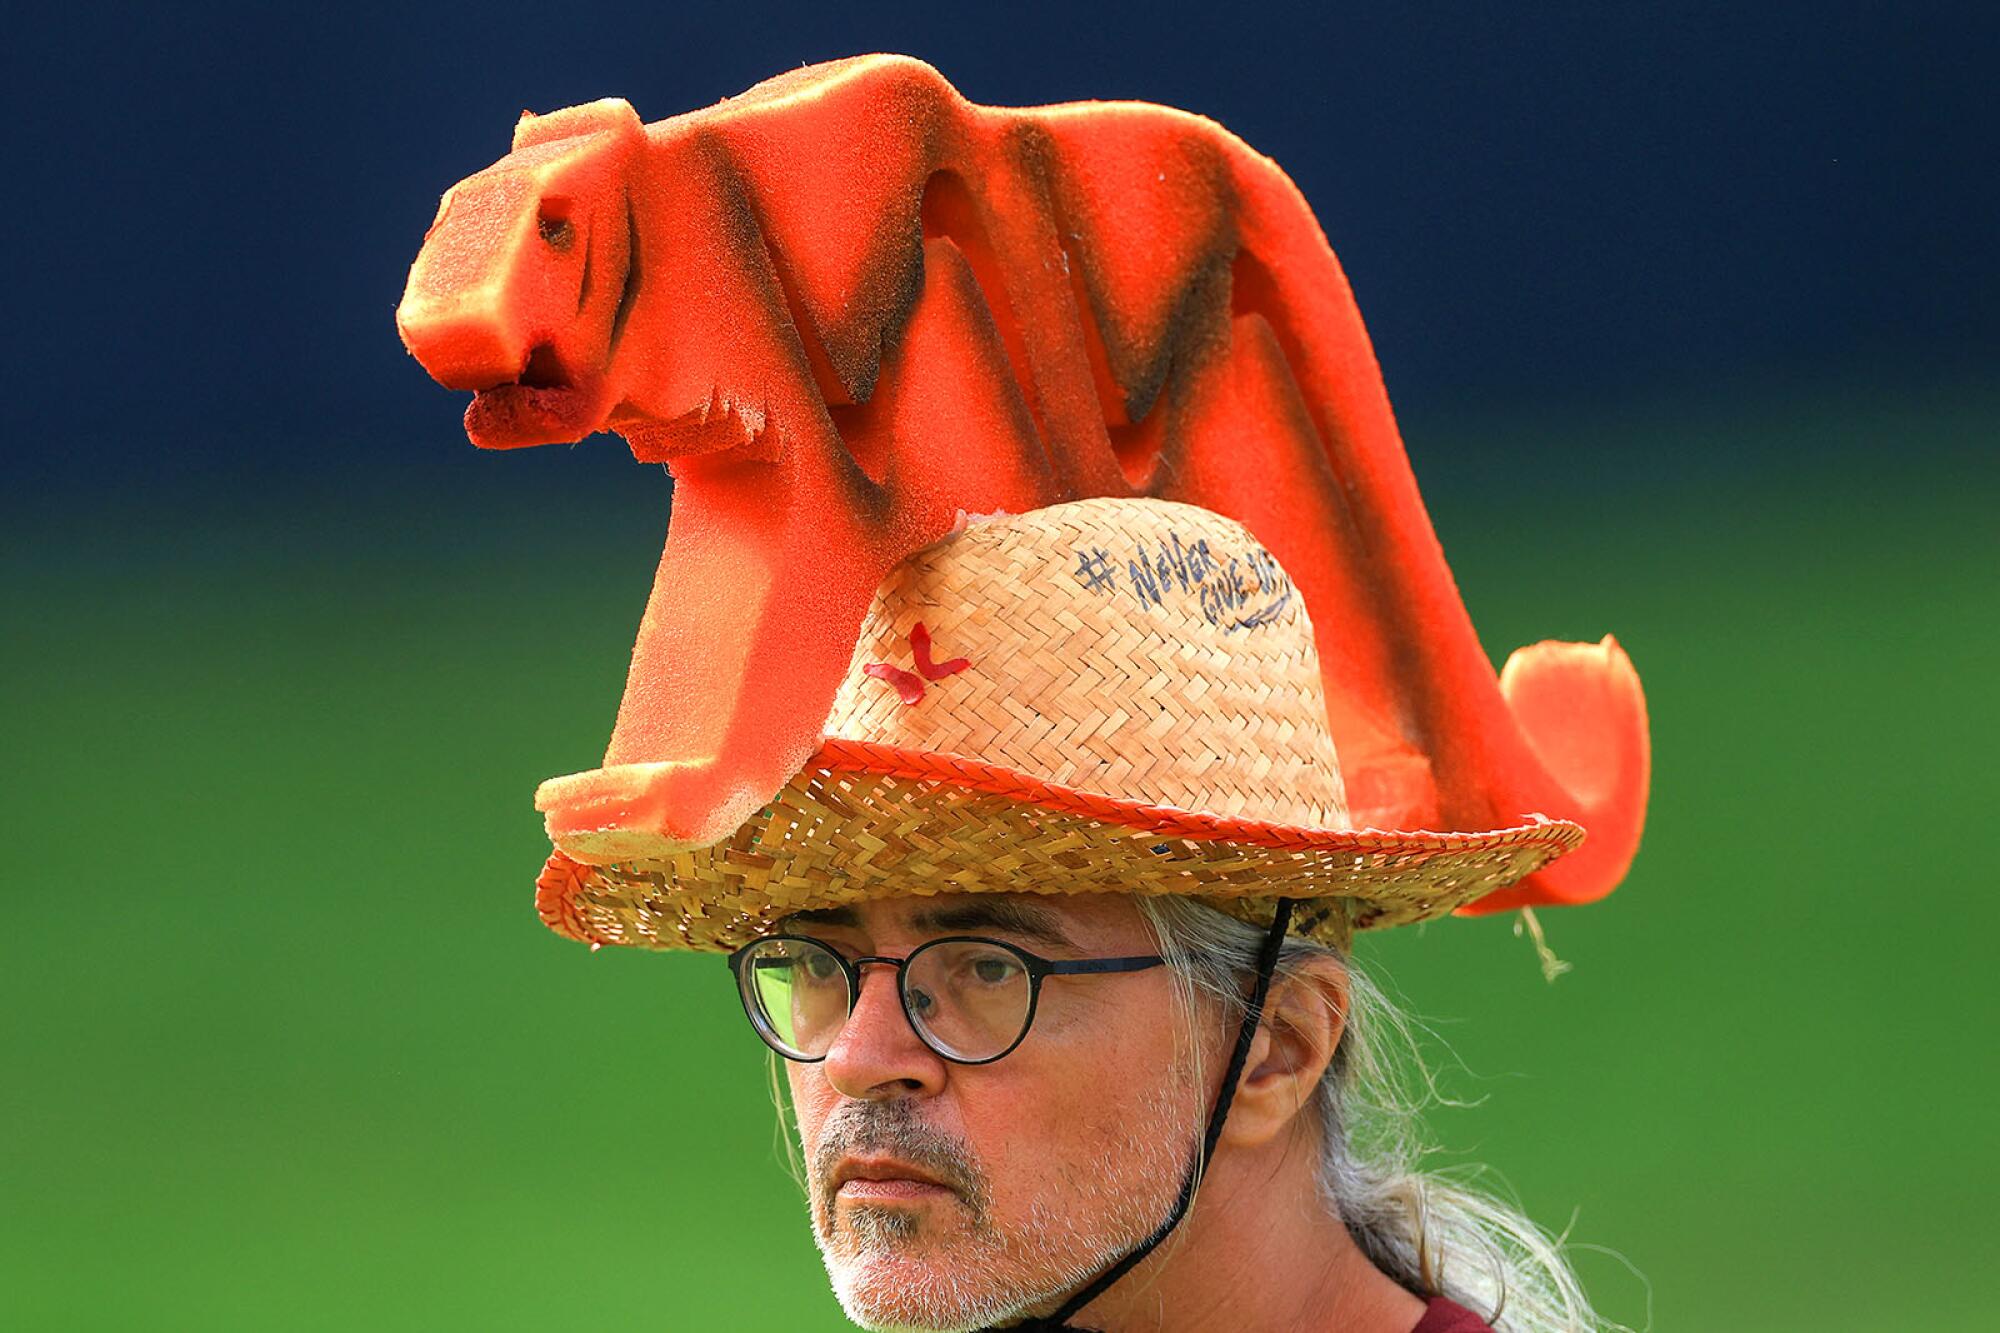 A Tiger Woods fan shows off his homemade Tiger hat during the first round of the PGA Championship.